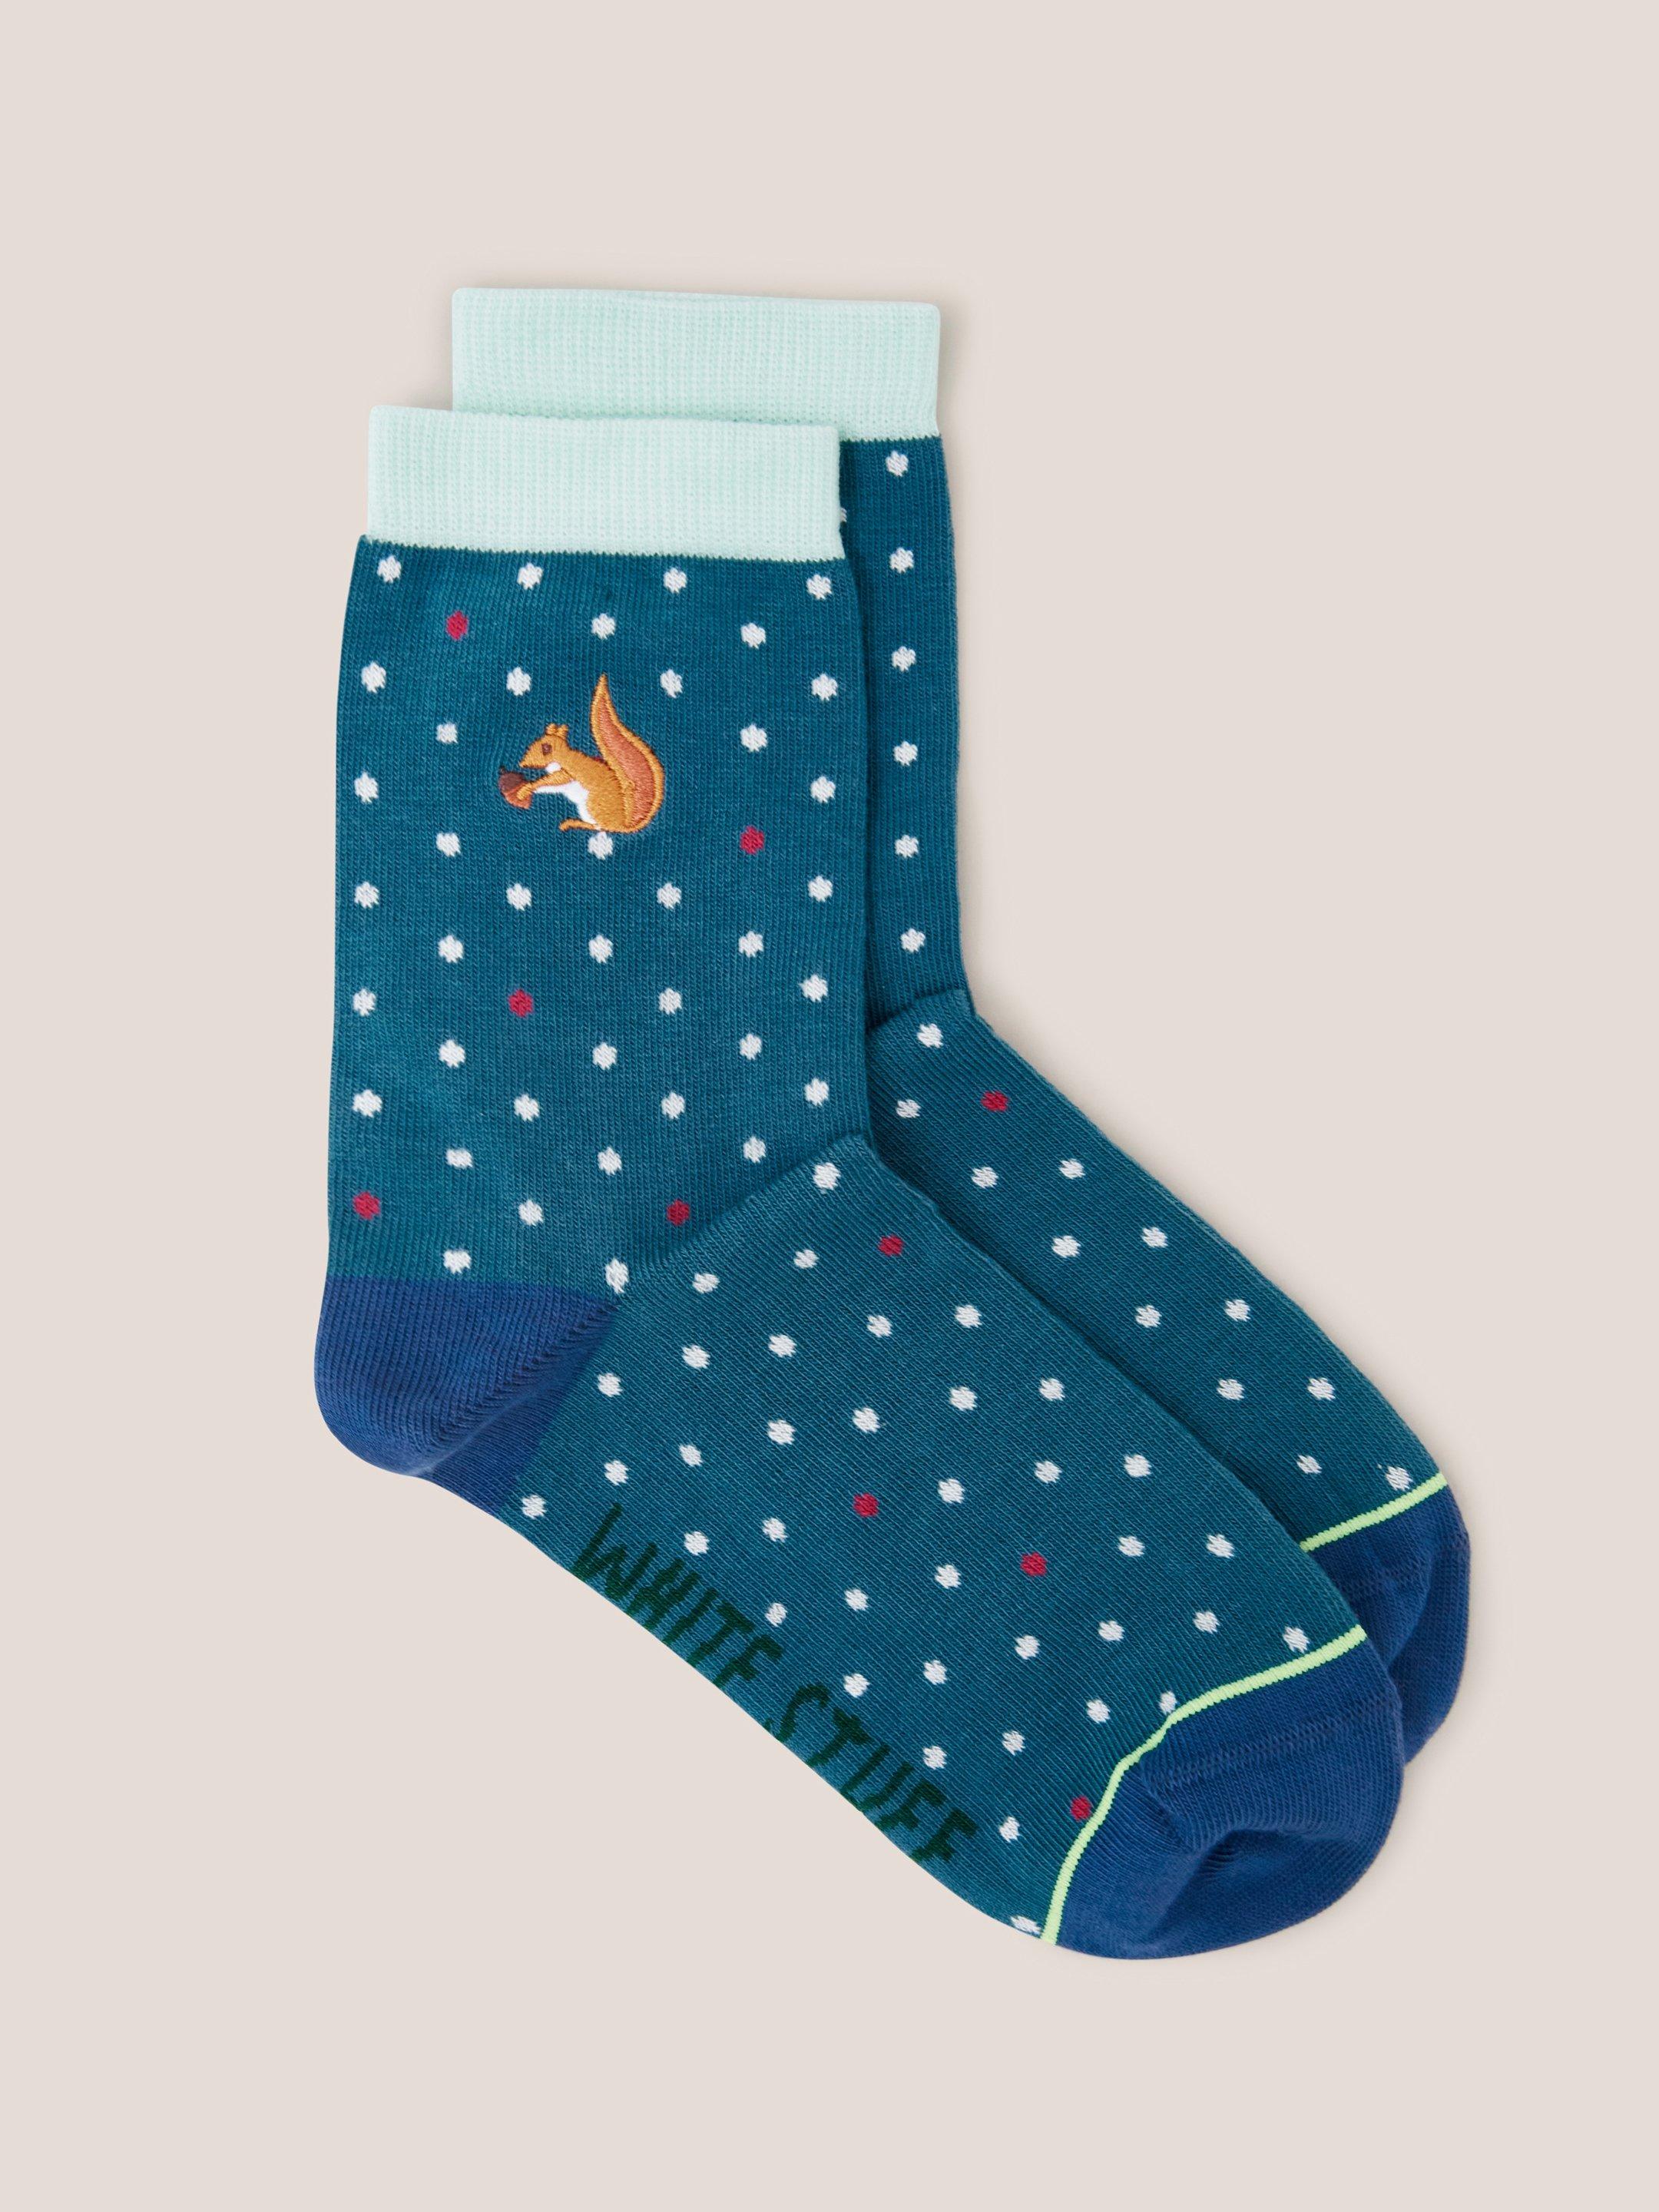 Squirrel Spot Ankle Socks in BLUE MLT - FLAT FRONT